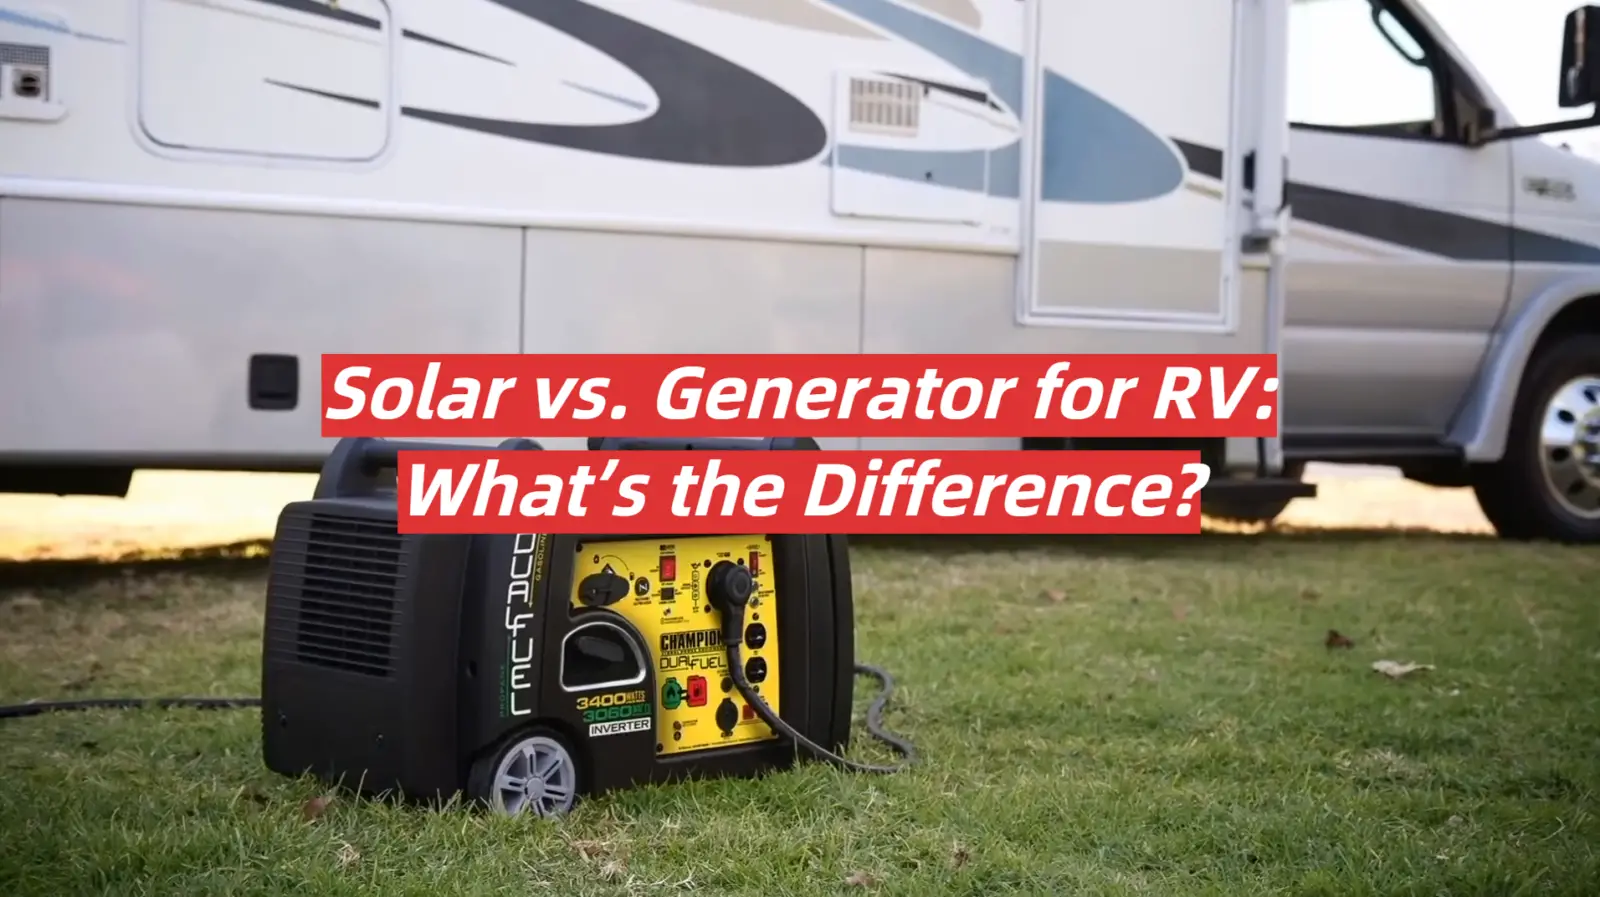 Solar vs. Generator for RV: What’s the Difference?